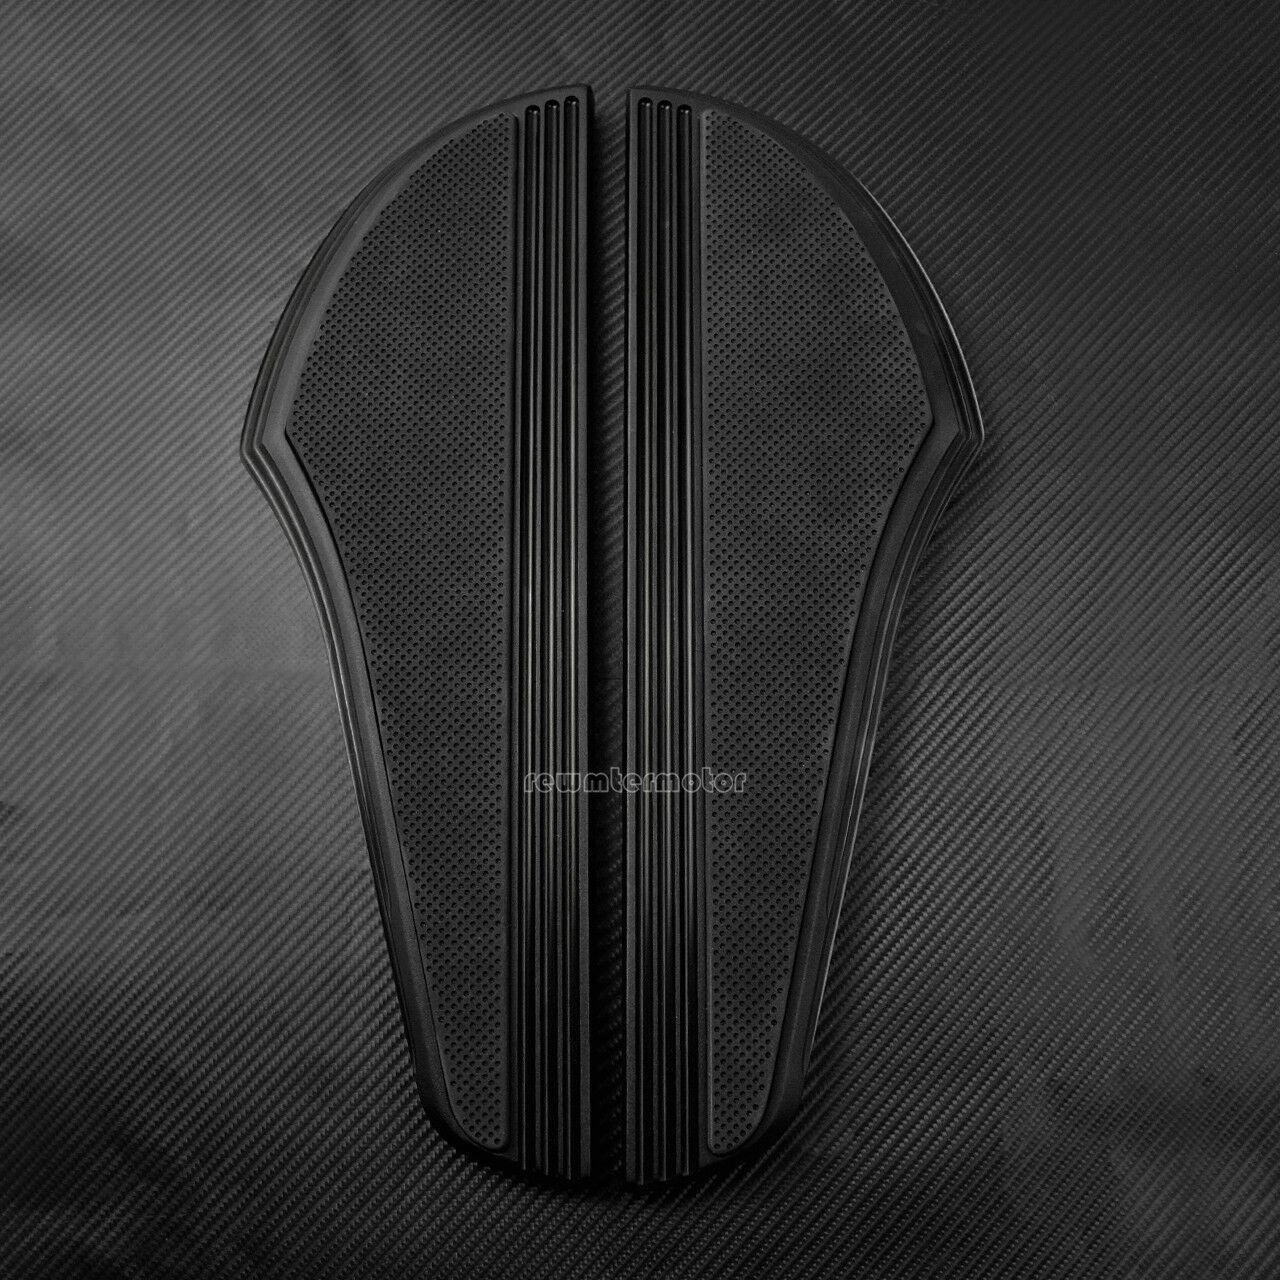 Driver + Passenger Rider Footboard Floorboard Fit For Harley Touring 1994-2017 - Moto Life Products